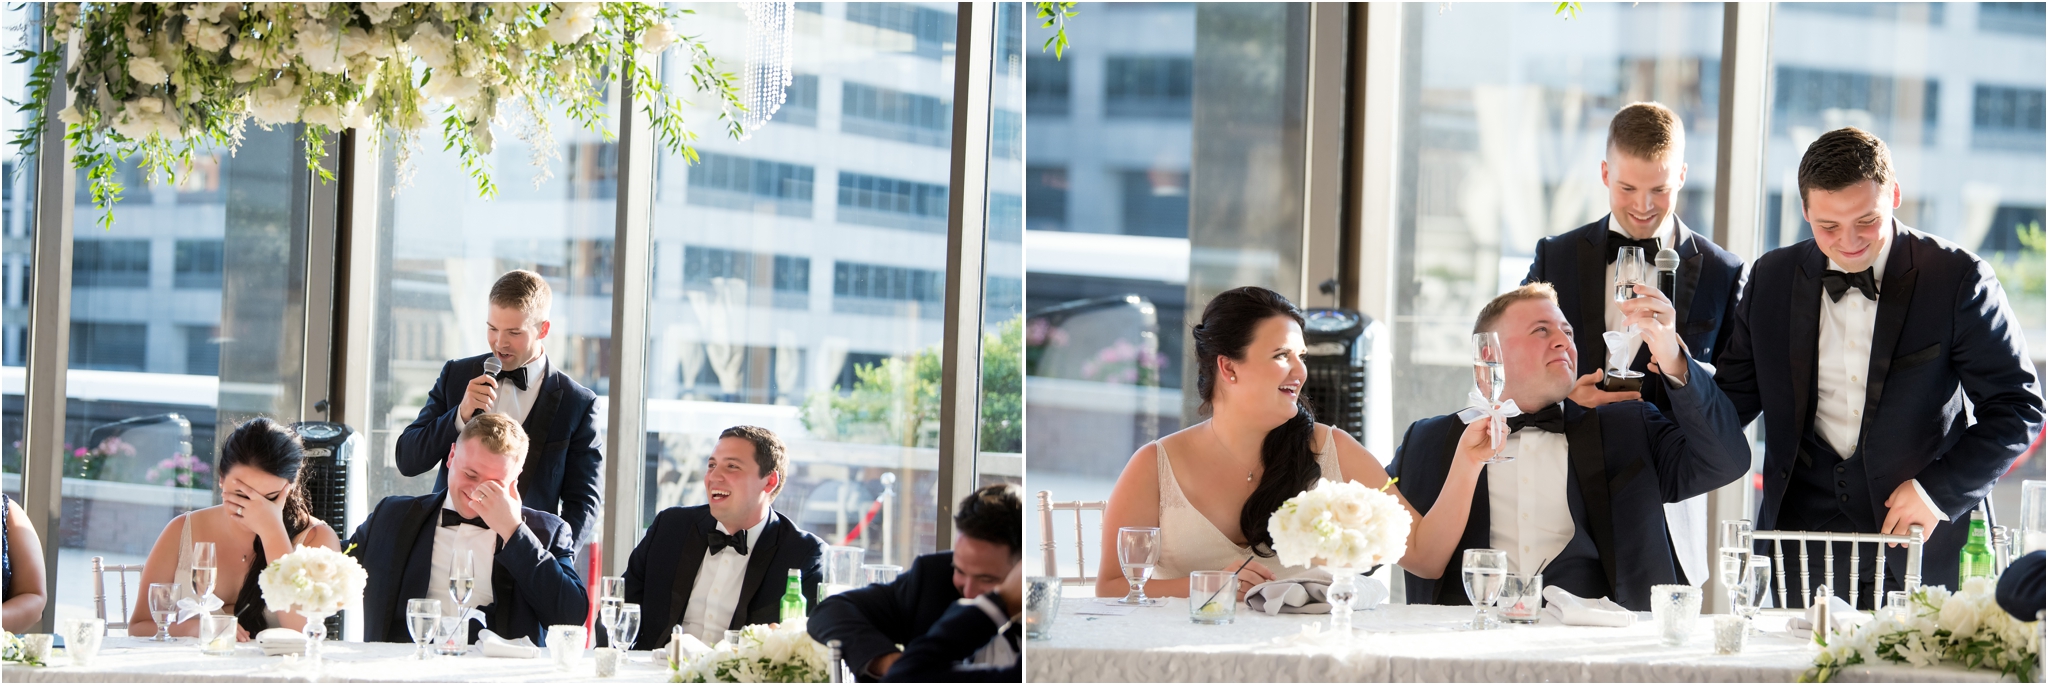 Regions Tower | Sarah and Rachel Wedding Photographers | Indianapolis, IN | Toast to the Bride and Groom